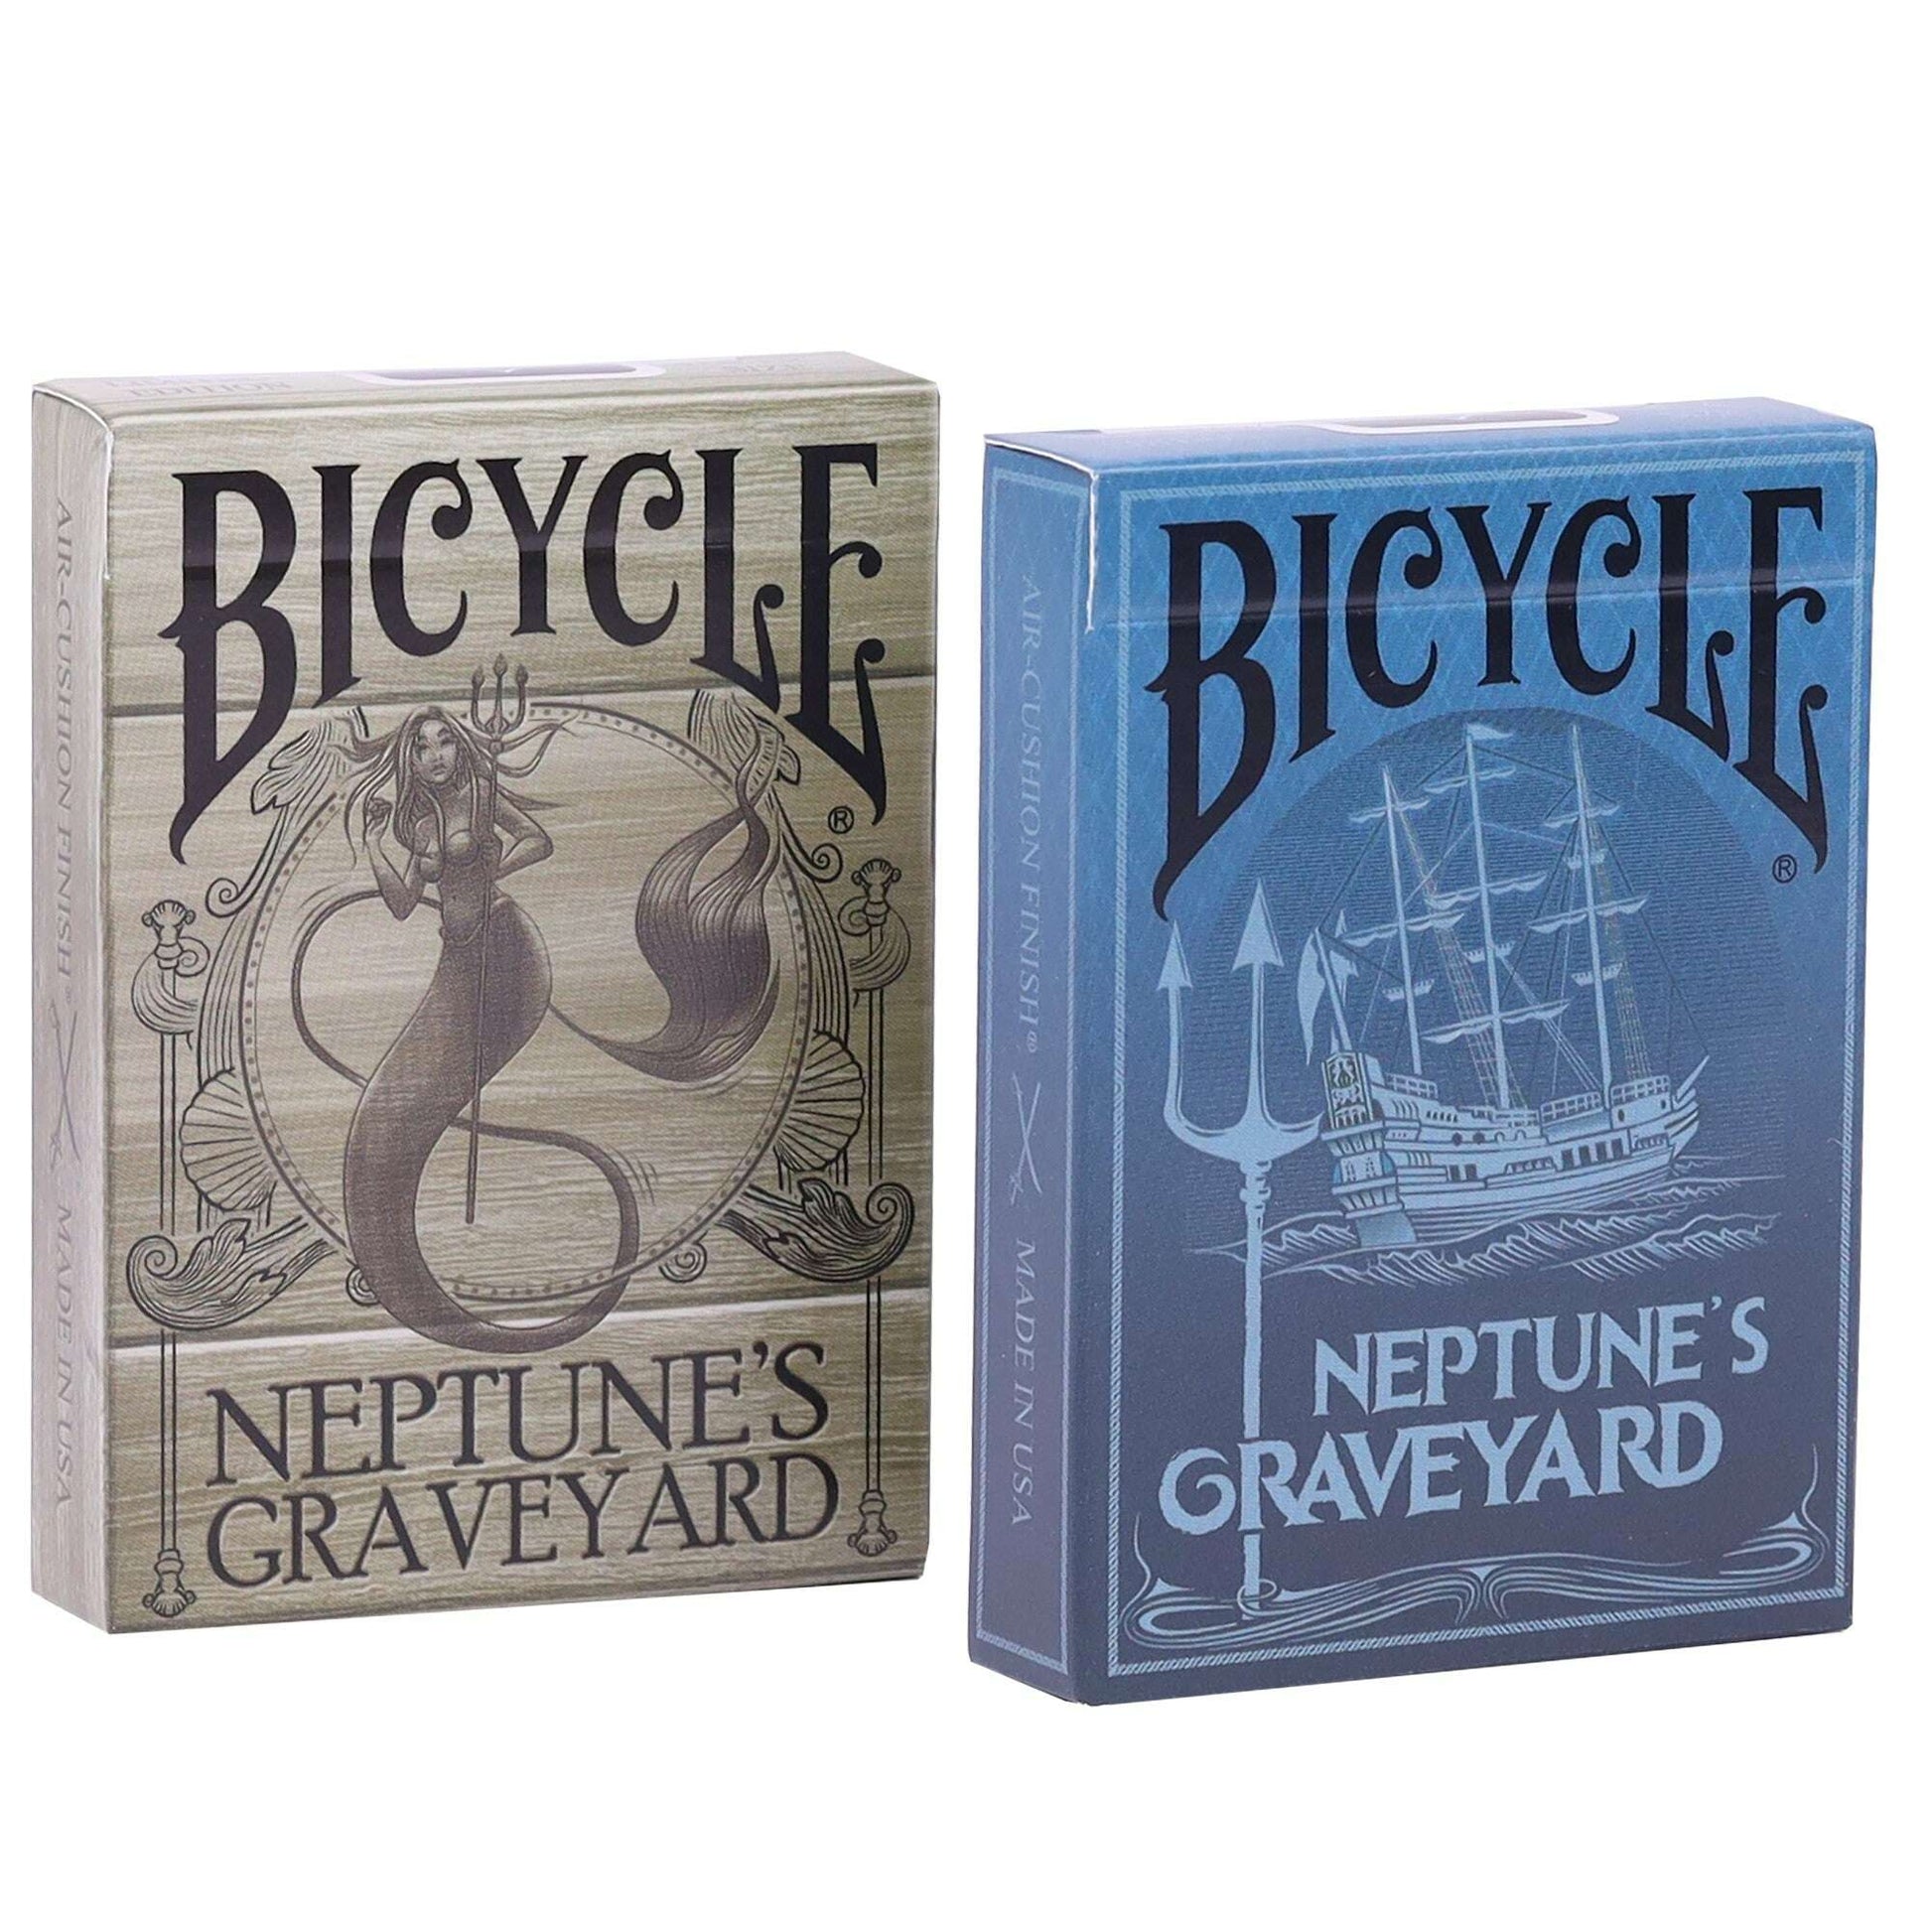 PlayingCardDecks.com-Neptune's Graveyard Bicycle Playing Cards: Two-Deck Set